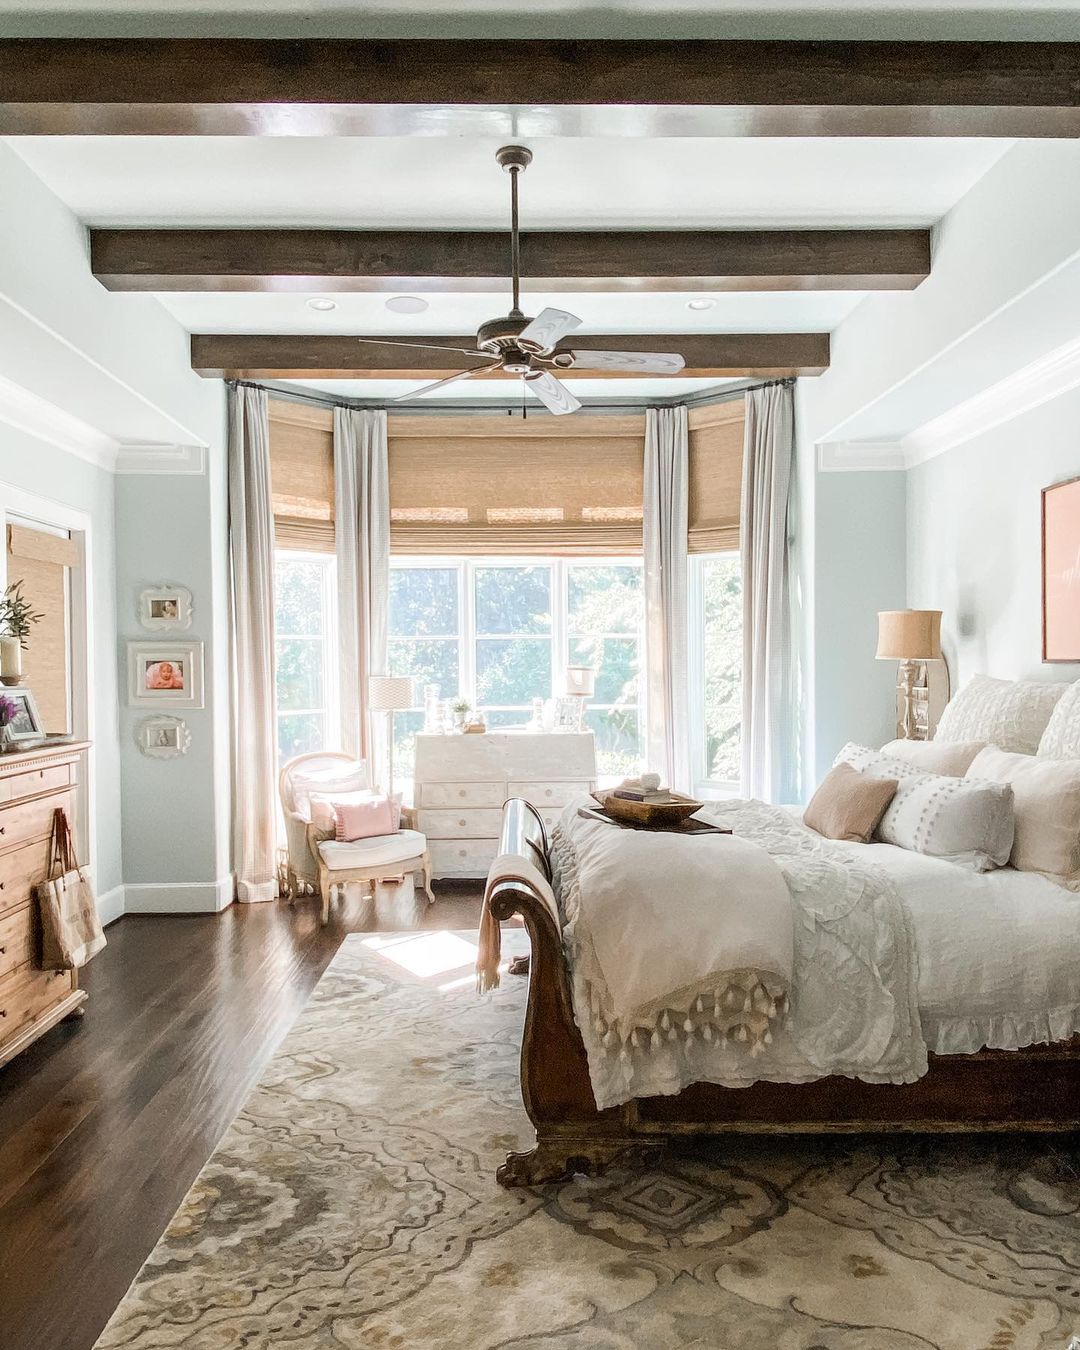 Classic Elegance with Central Beam Accent